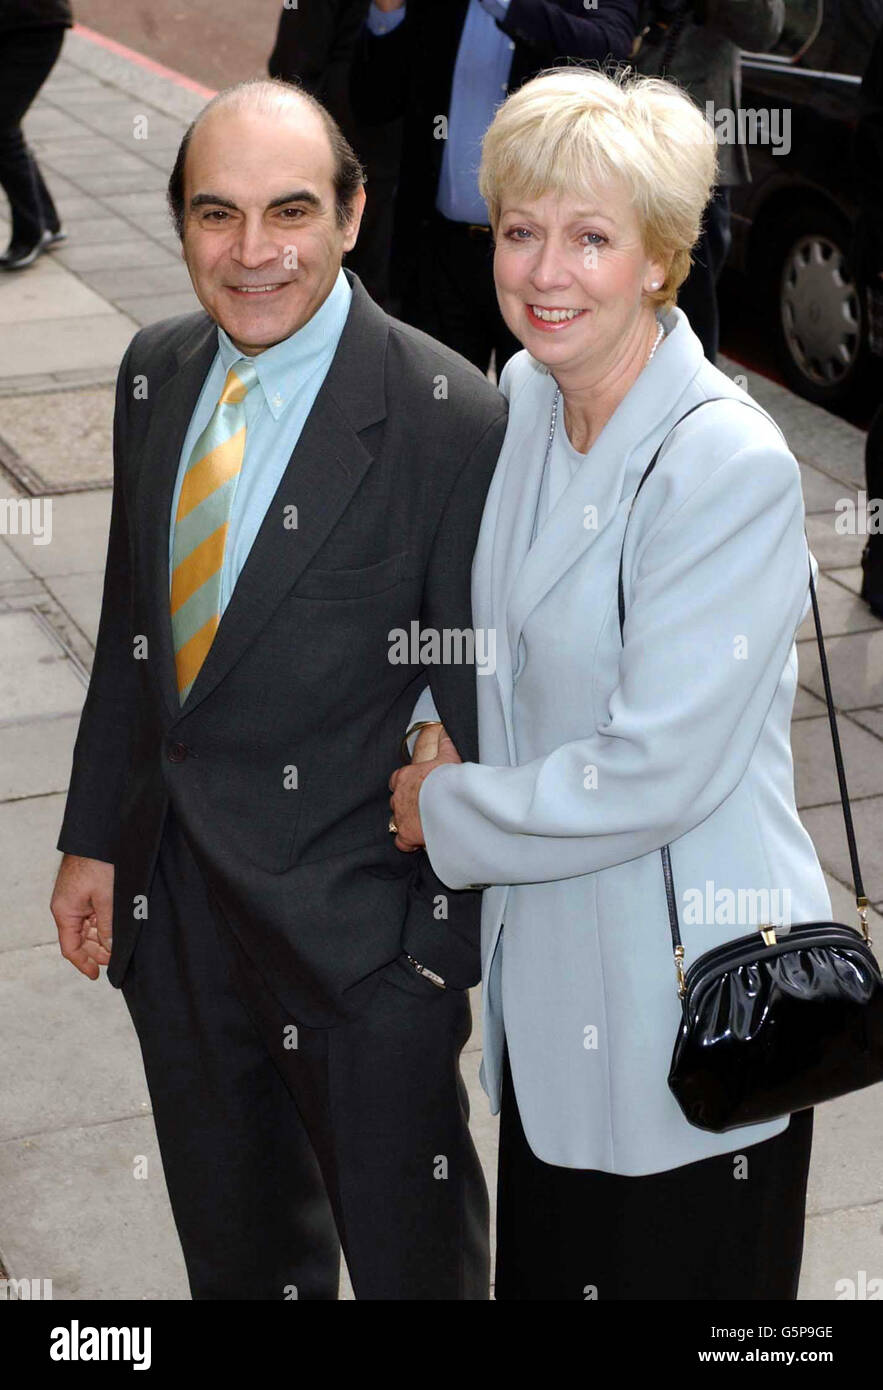 Actor David Suchet with his wife Sheila arriving at the Le Meridien Grosvenor House Hotel, London, for the 2002 TRIC (Television & Radio Industries Club) Awards. Stock Photo